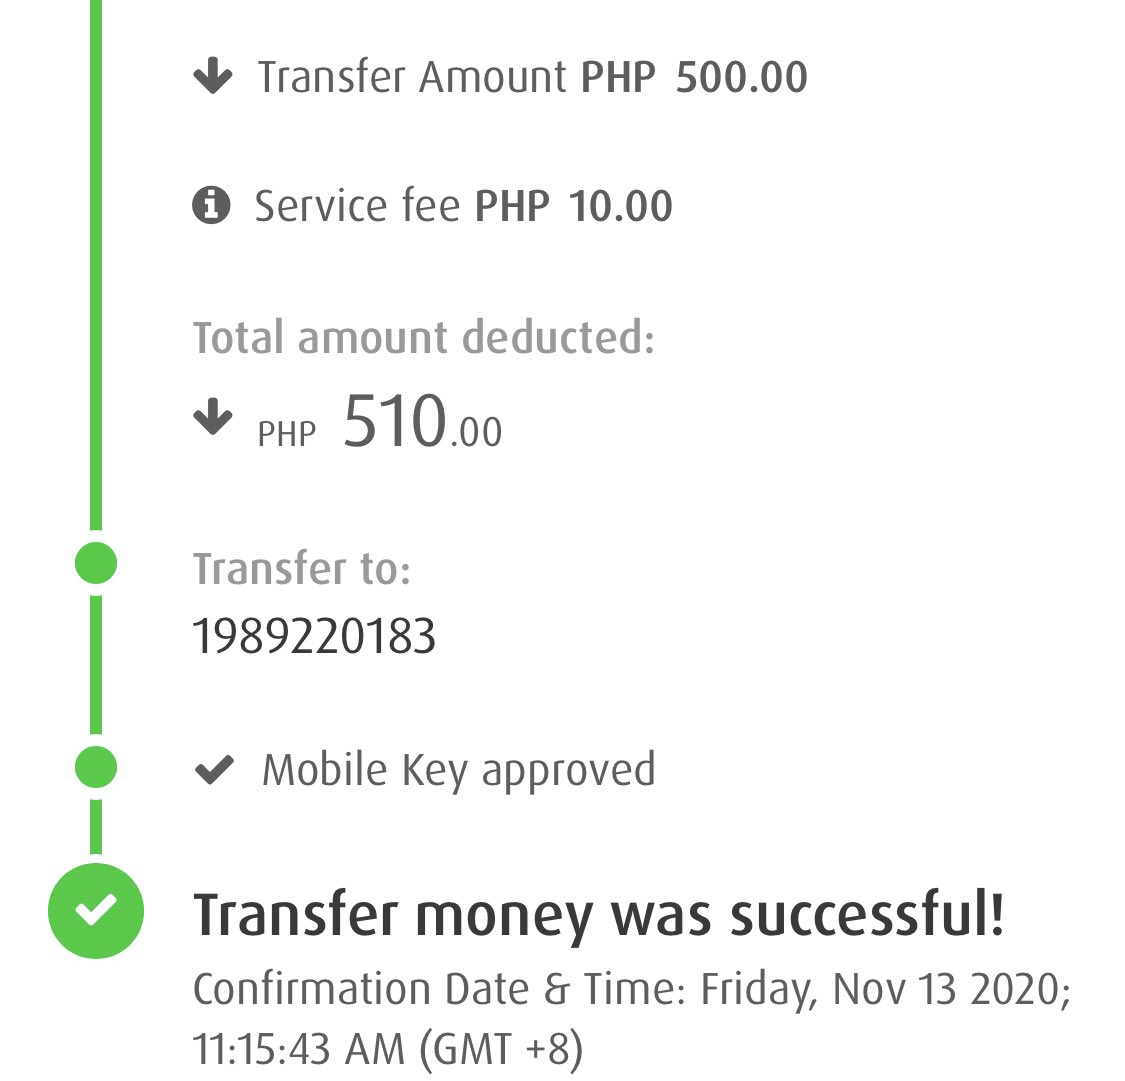 Donated ₱500 to  @Bahaghari_PH which is providing hot meals and material assistance to affected communities. Match me.